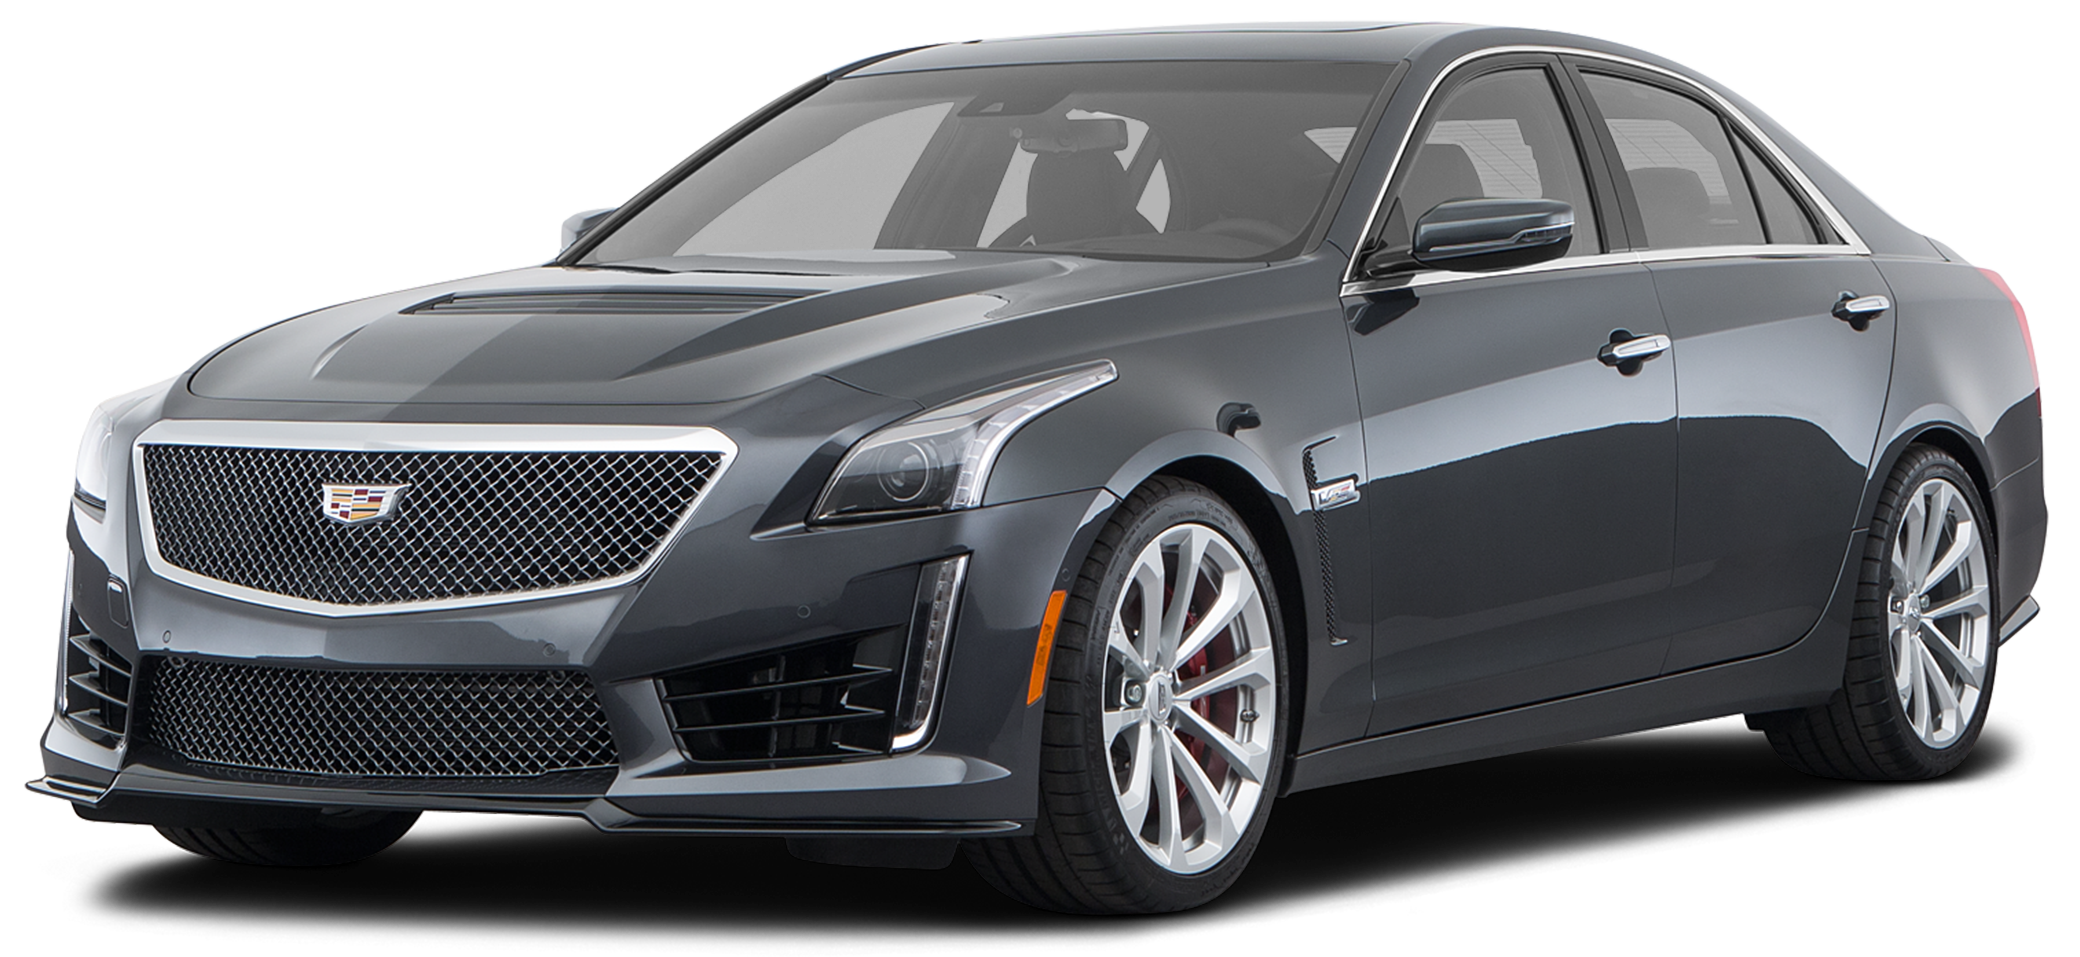 2019 CADILLAC CTS-V Incentives, Specials & Offers in Richlands VA